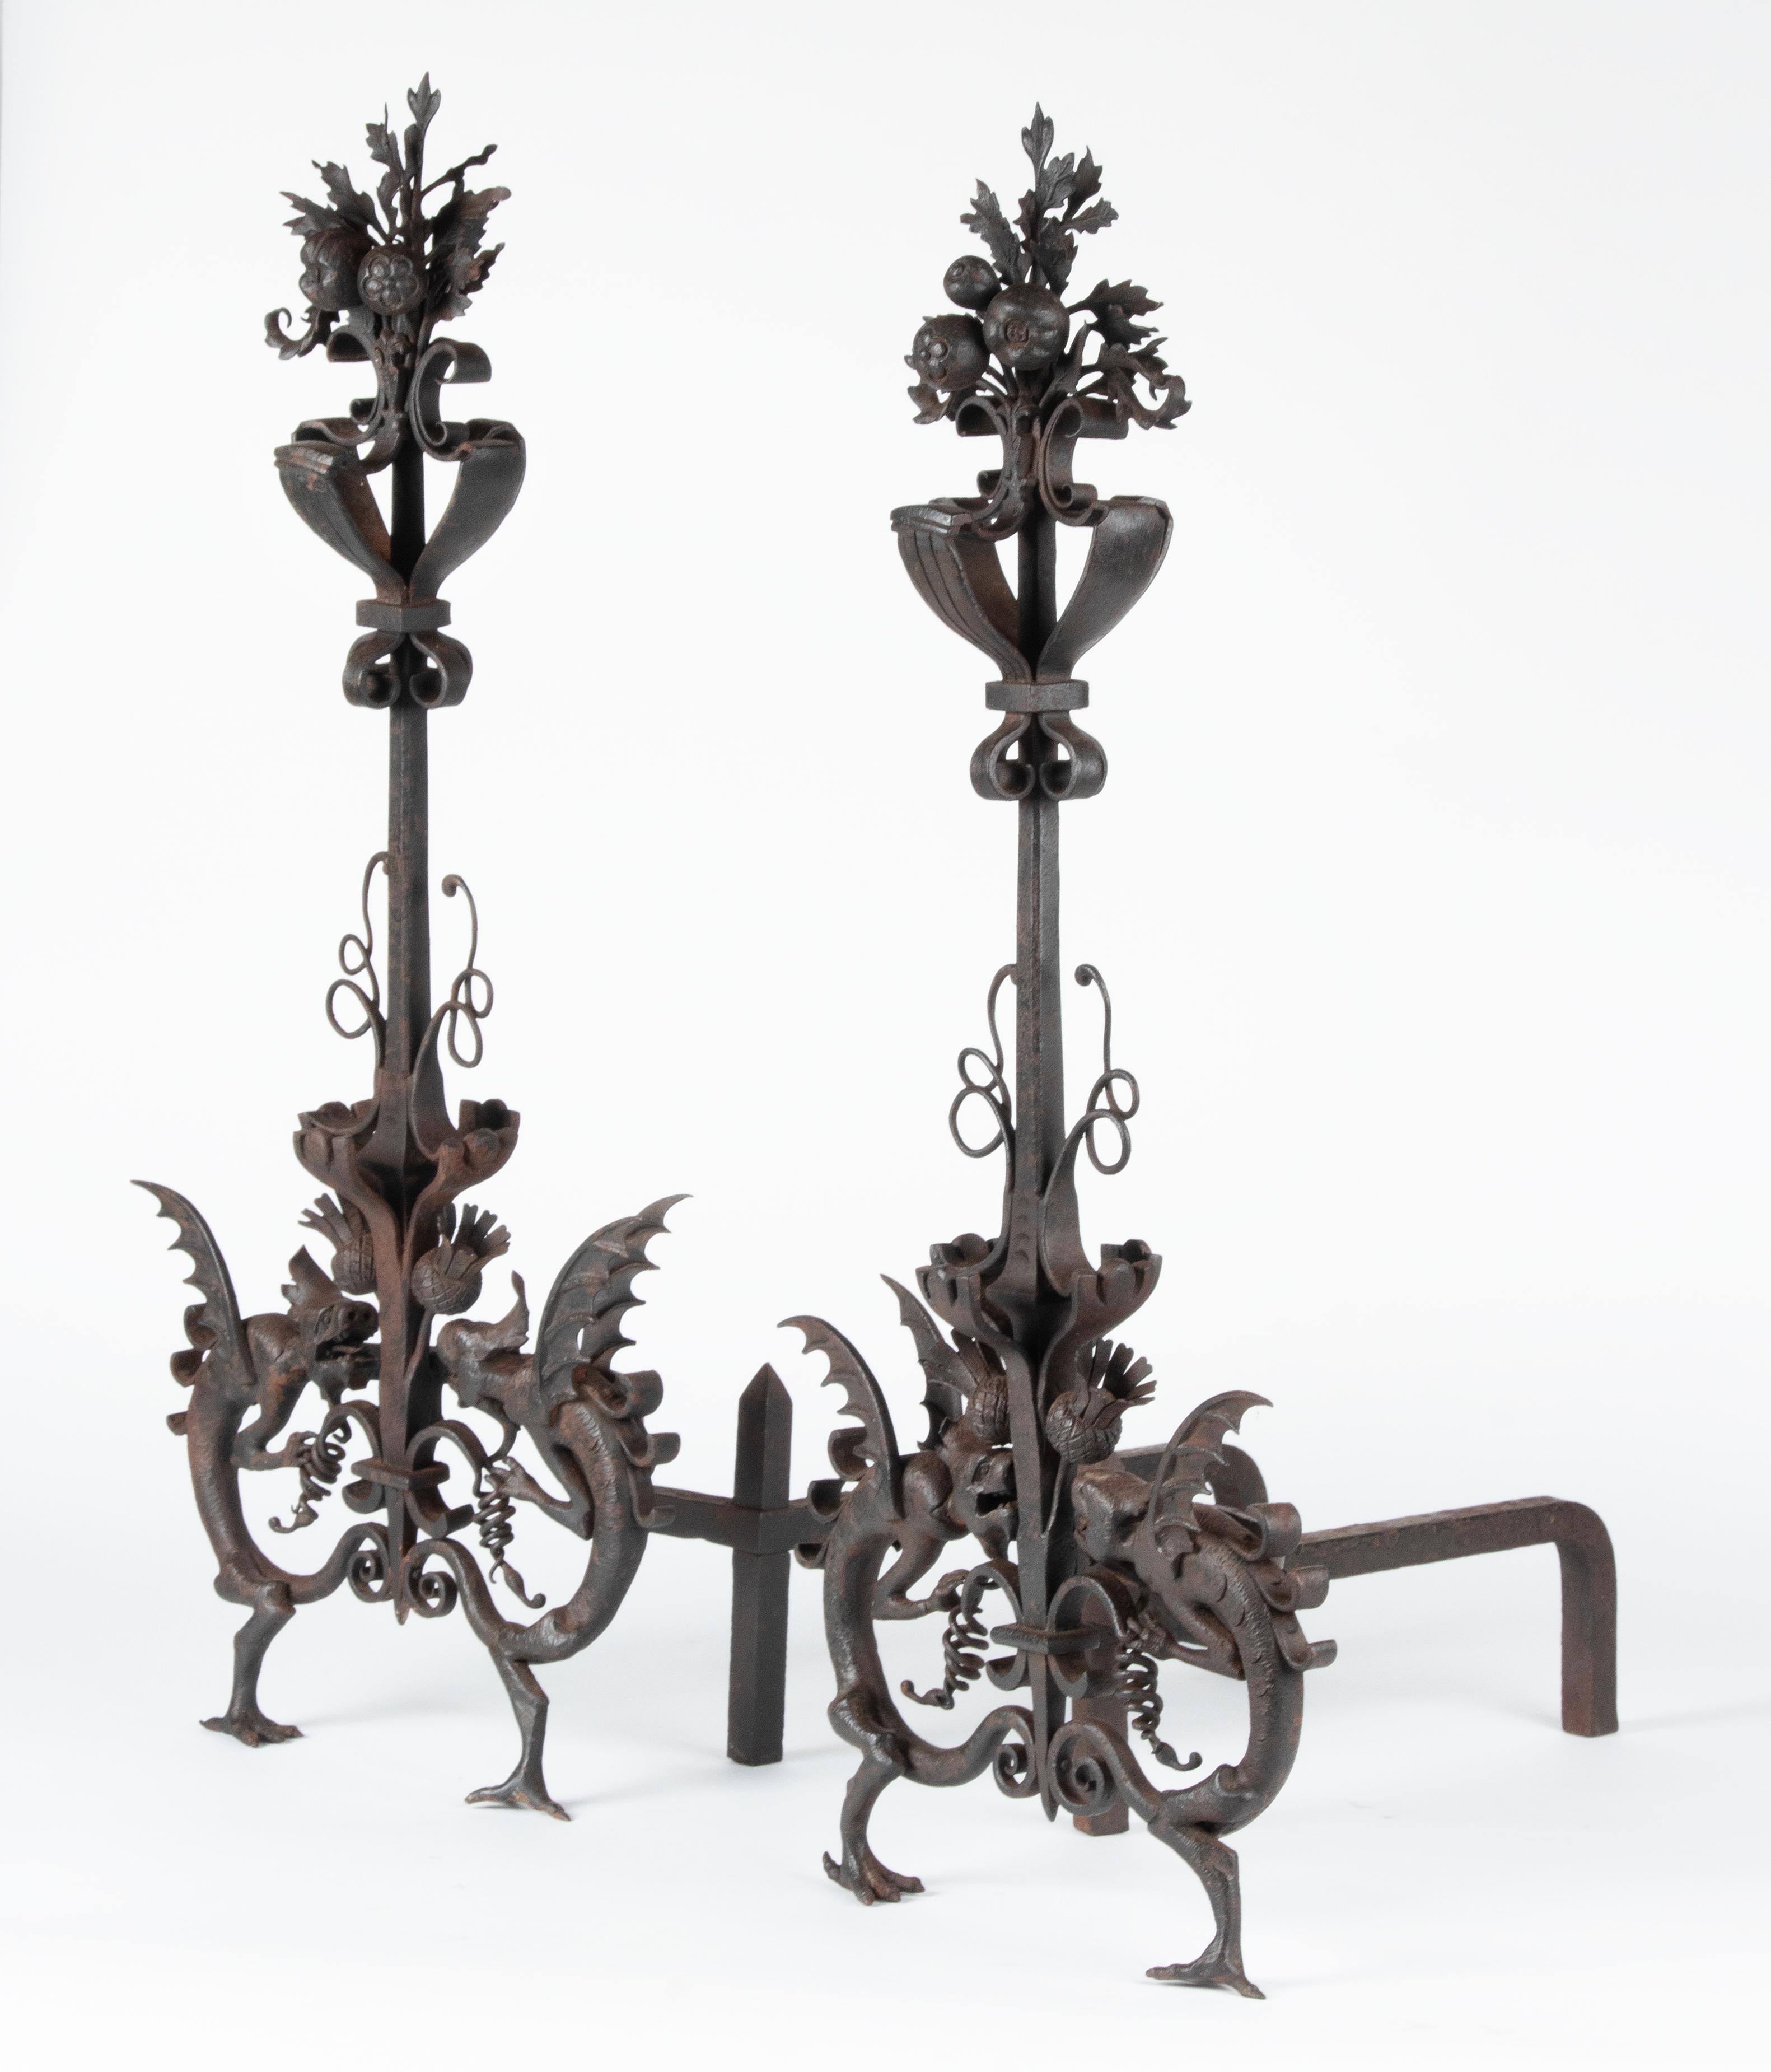 A pair of extra-tall handcrafted wrought iron and cast iron andirons in Samuel Yellin style, in the Arts & Crafts spirit. Partly hand-wrought and partly cast iron. With flanking dragons resting on his feet. At the top fruit with leaves. Excellence